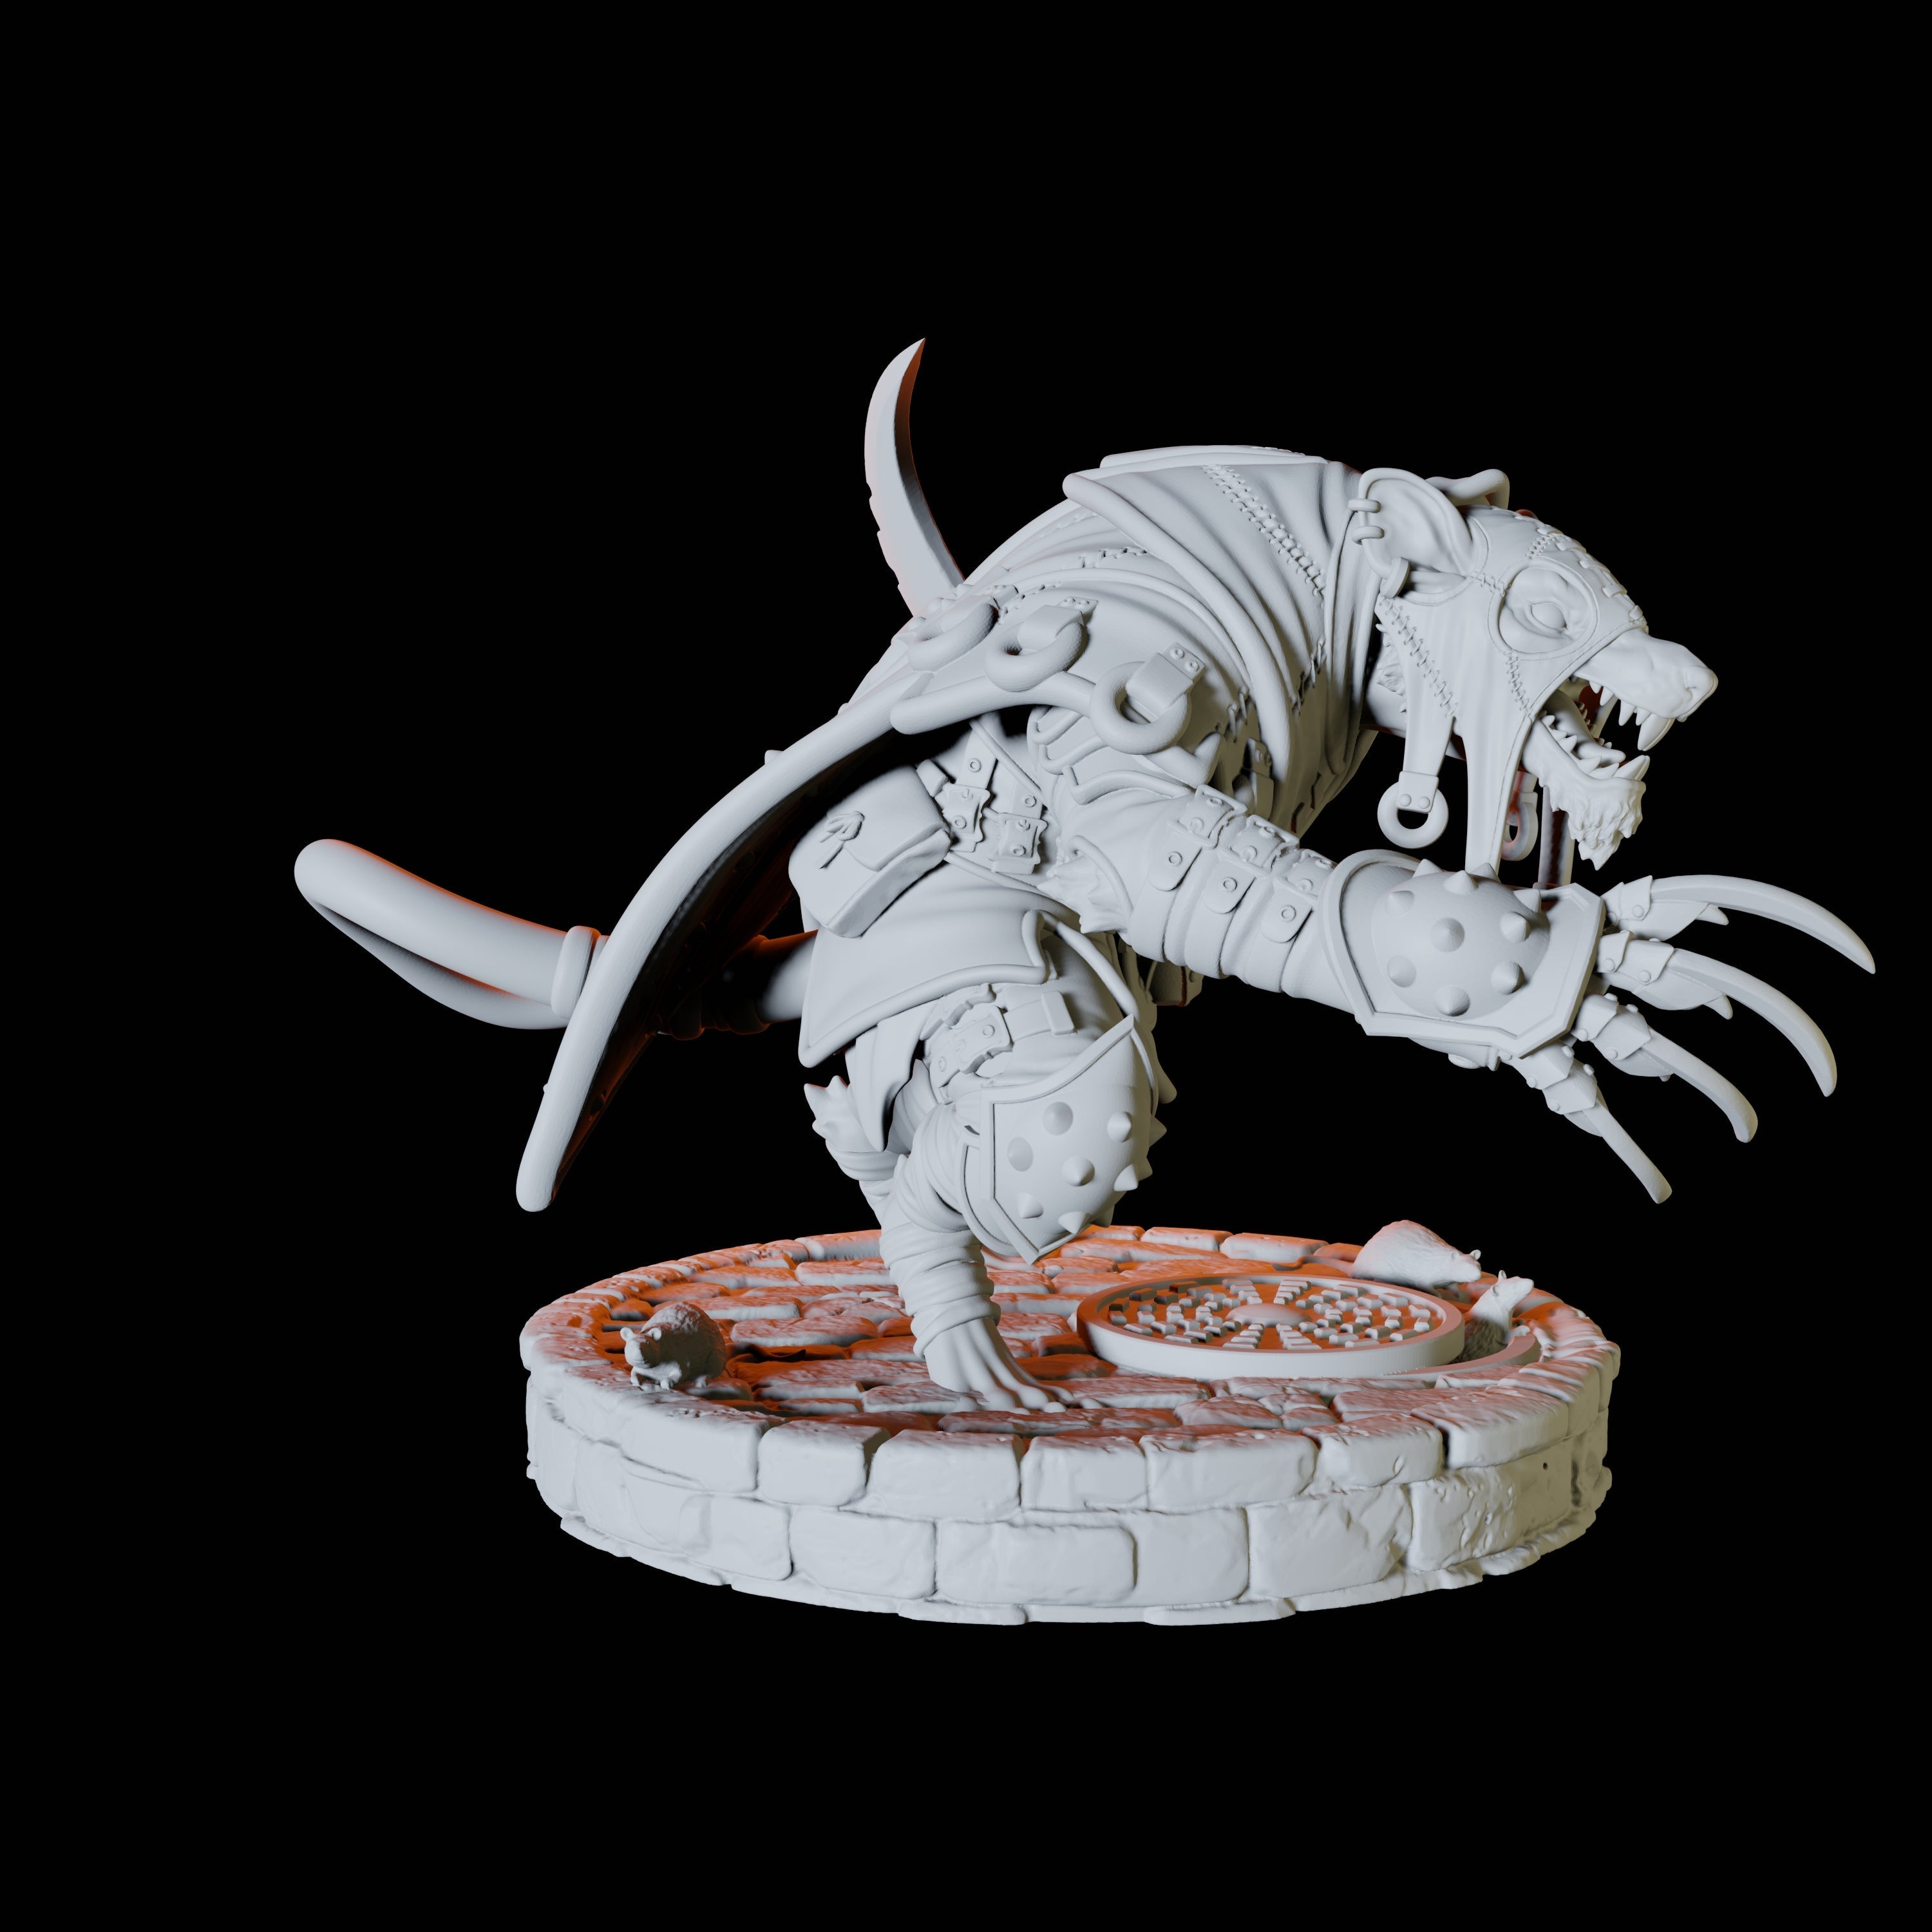 Ratfolk Assassin D Miniature for Dungeons and Dragons, Pathfinder or other TTRPGs